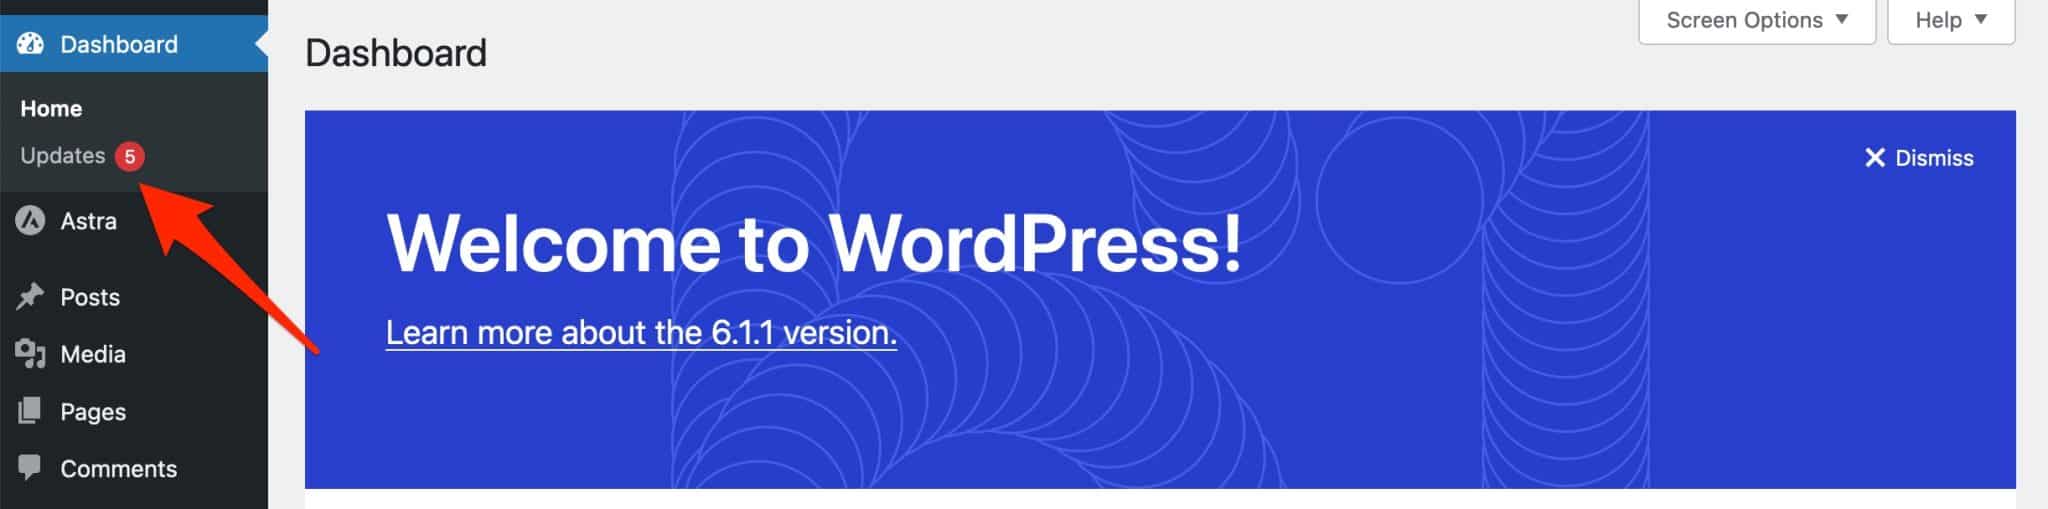 The WordPress admin interface will alert you when updates are available.